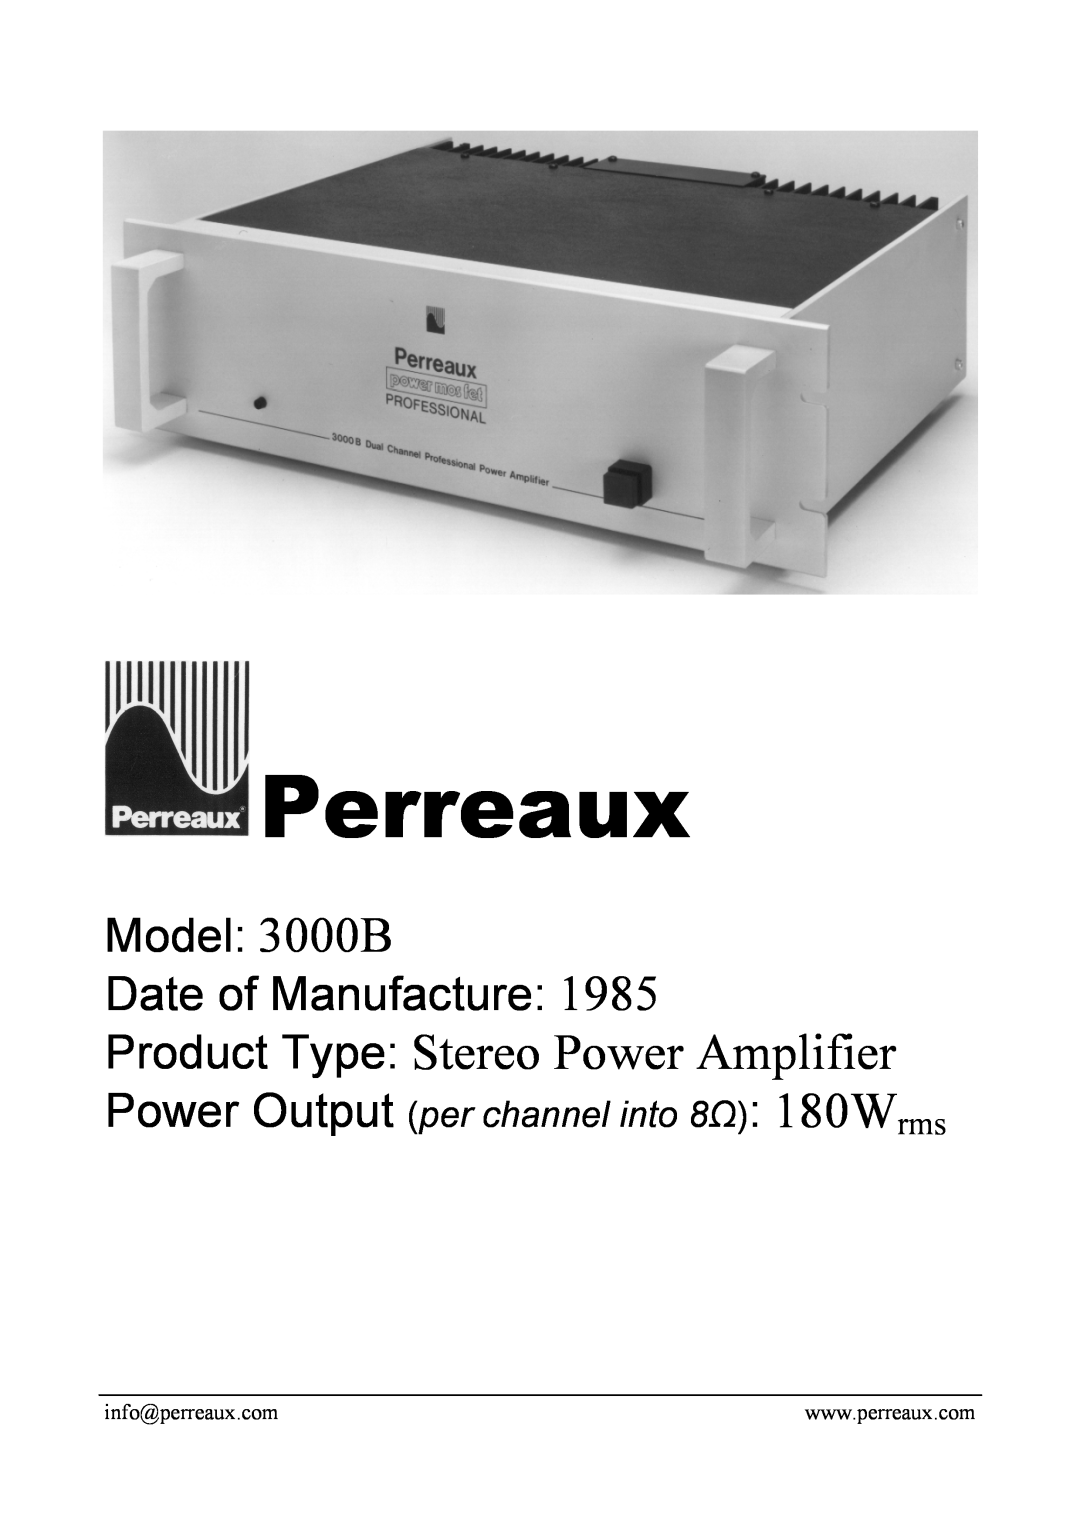 Perreaux manual Perreaux, Product Type Stereo Power Amplifier, Model 3000B Date of Manufacture 